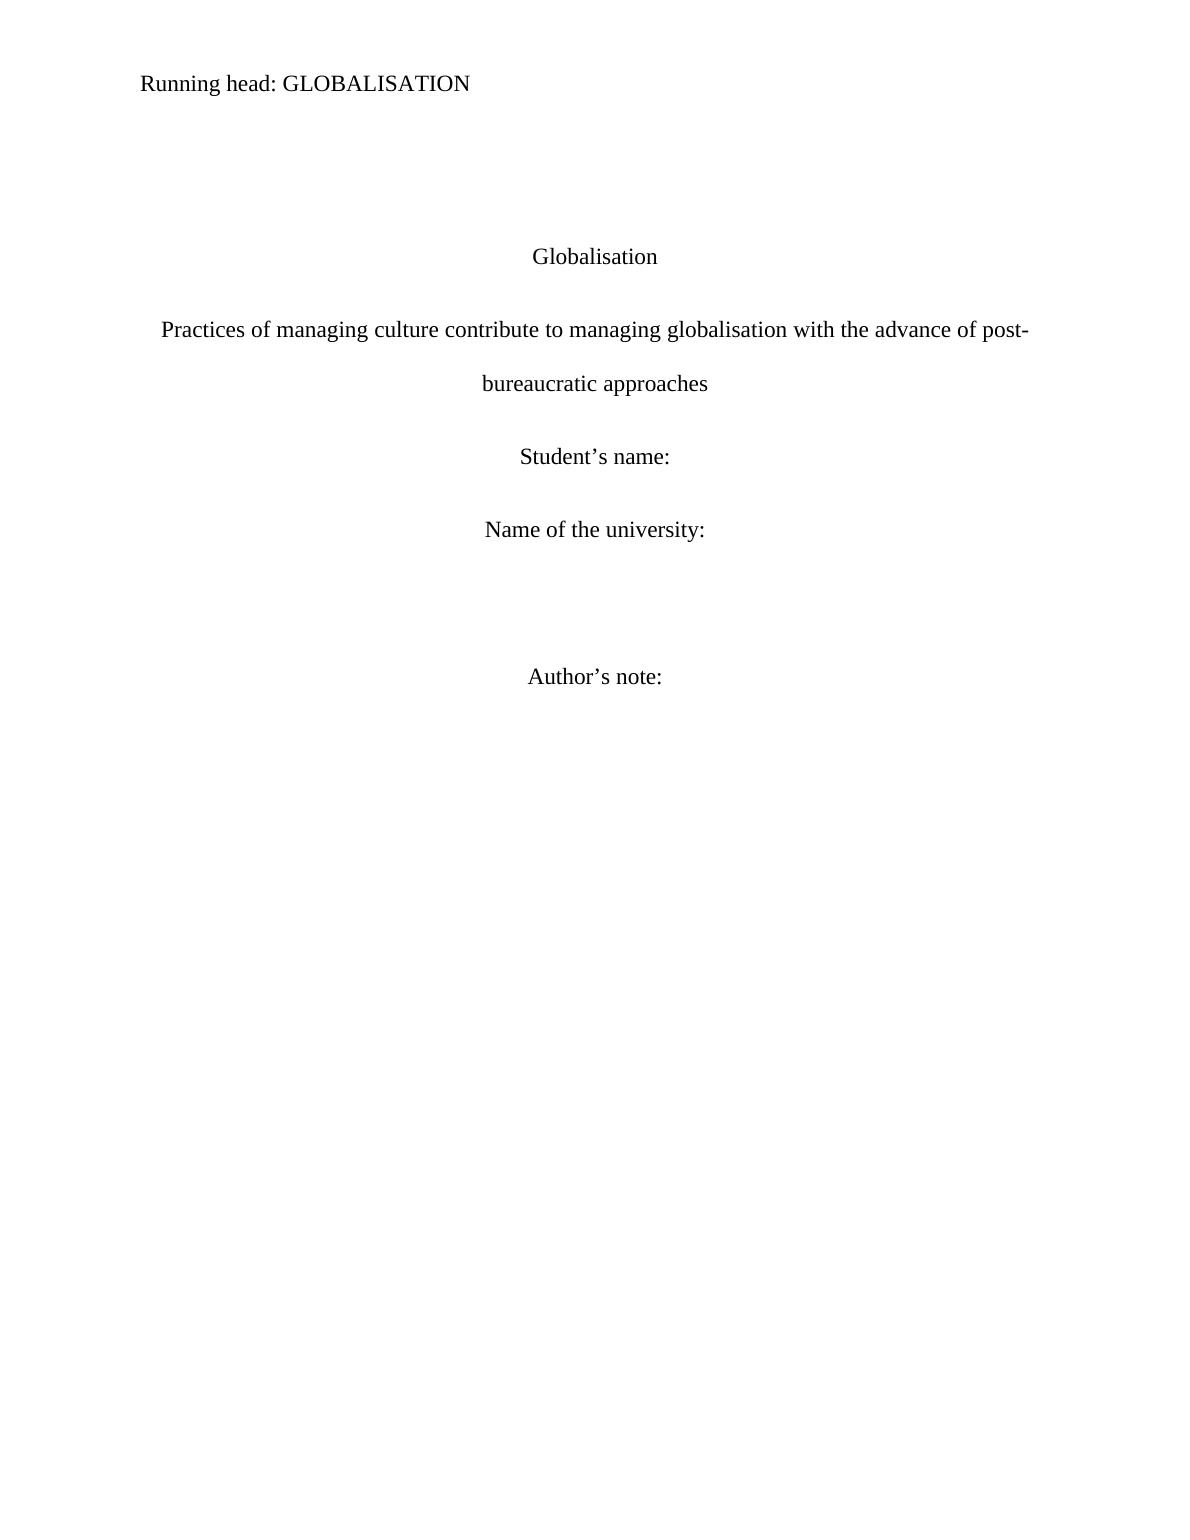 Essay on Globalisation Practices of Managing Culture_1